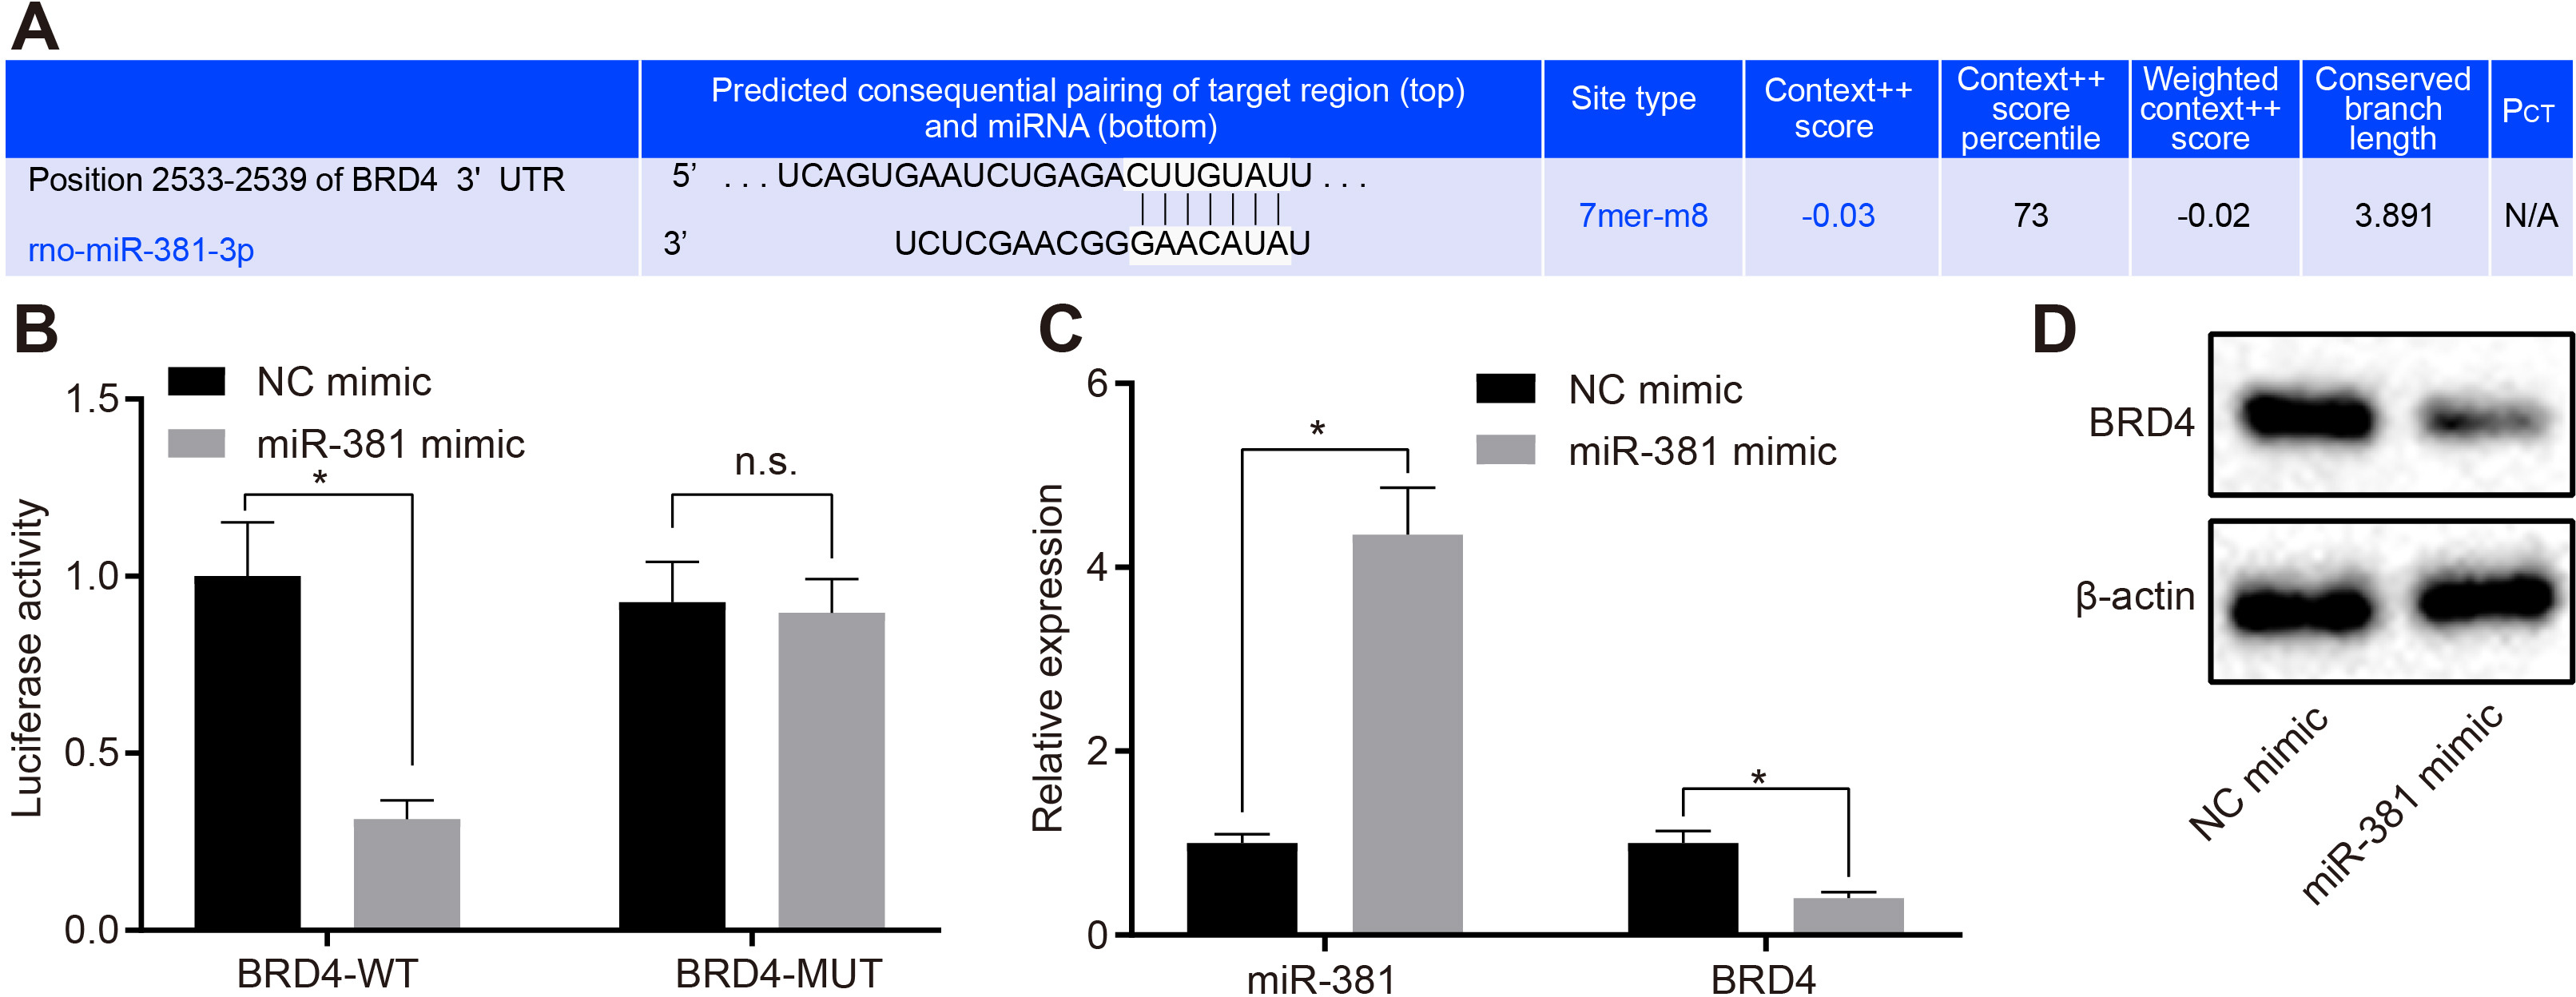 Fig. 2 
            MicroRNA-381 (miR-381) inhibited the expression of bromodomain-containing protein 4 (BRD4) in dorsal root ganglia (DRG) cells. a) miRNA.org was used to predict and analyze the target binding sites between miR-381 and BRD4. b) The relationship between miR-381 and three prime untranslated (3’UTR) region of BRD4 in Homo sapiens embryonic kidney (HEK)293T cells was detected by dual-luciferase reporter assay. c) Quantitative reverse transcription polymerase chain reaction (RT-qPCR) was used to detect the expression of miR-381 and BRD4 in DRG cells transfected with indicated plasmids. d) Western blot analysis was used to detect the expression of BRD4 in DRG cells transfected with indicated plasmids and β-actin was taken as internal parameter. Measurement data were expressed as means and SDs. The independent-samples t-test was used to compare the data between two groups. Results were representative of three individual experiments. *p < 0.05 versus the NC mimic. miRNA, microRNA; n.s., not significant (p > 0.05); PCT, conservative targeting probability.
          